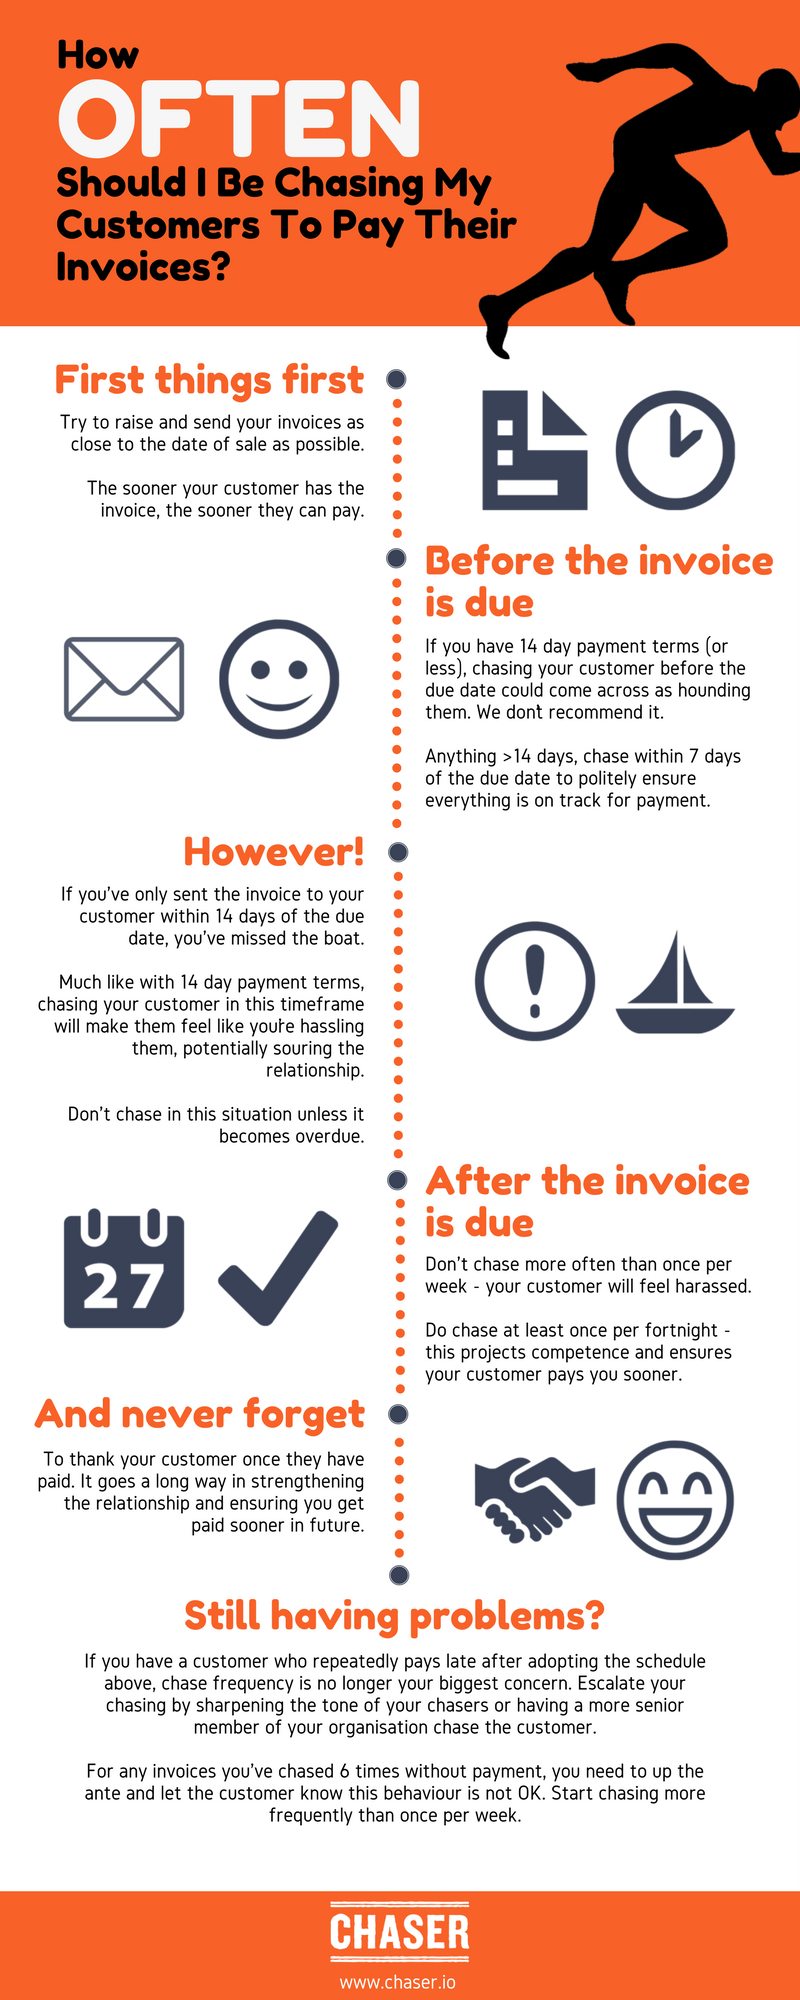 How Often Should I Be Chasing My Customers To Pay Their Invoices Infographic